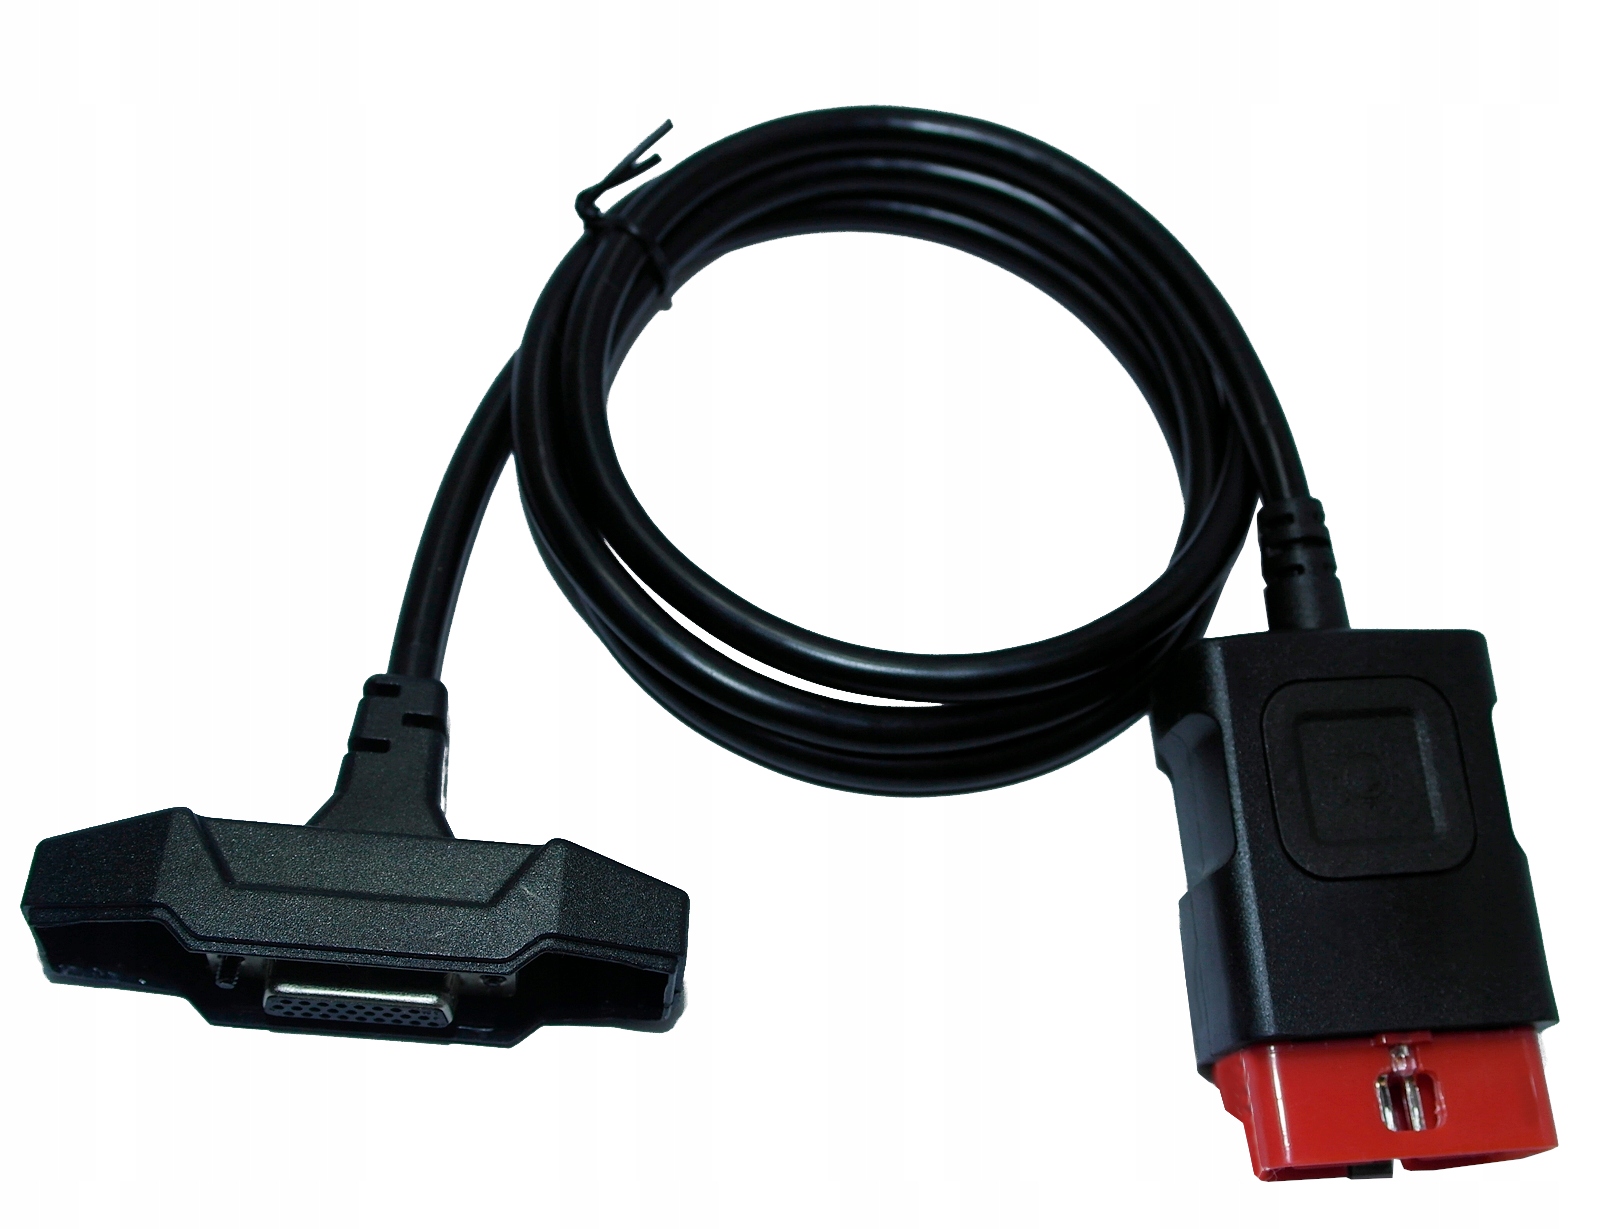 Buy CABLE OBD2 MULTIDIAG AUTOCOM DELPHI DS150 CDP WOW used from Poland